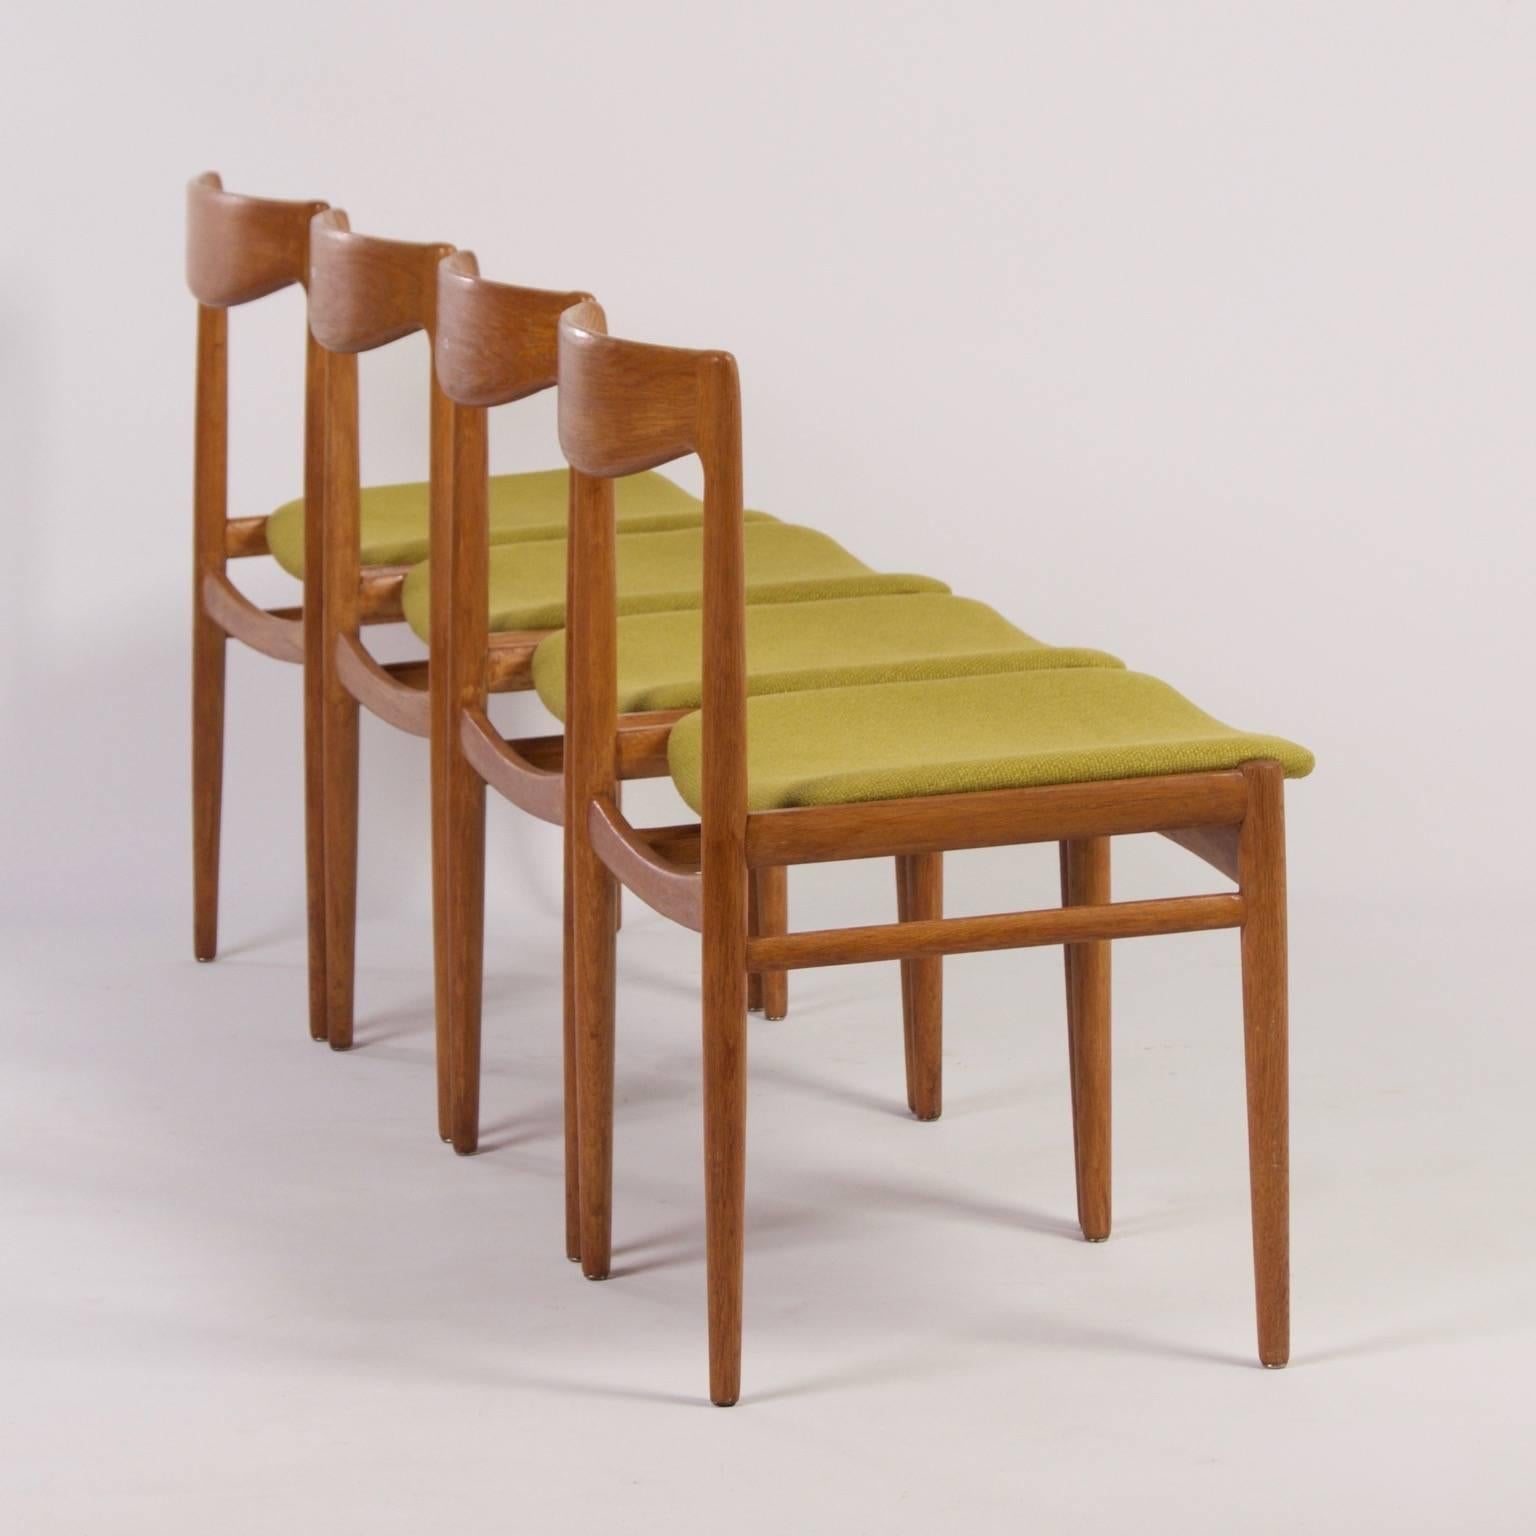 Mid-20th Century Green Danish Dining Chairs in the Style of Møller, Denmark, 1960s For Sale